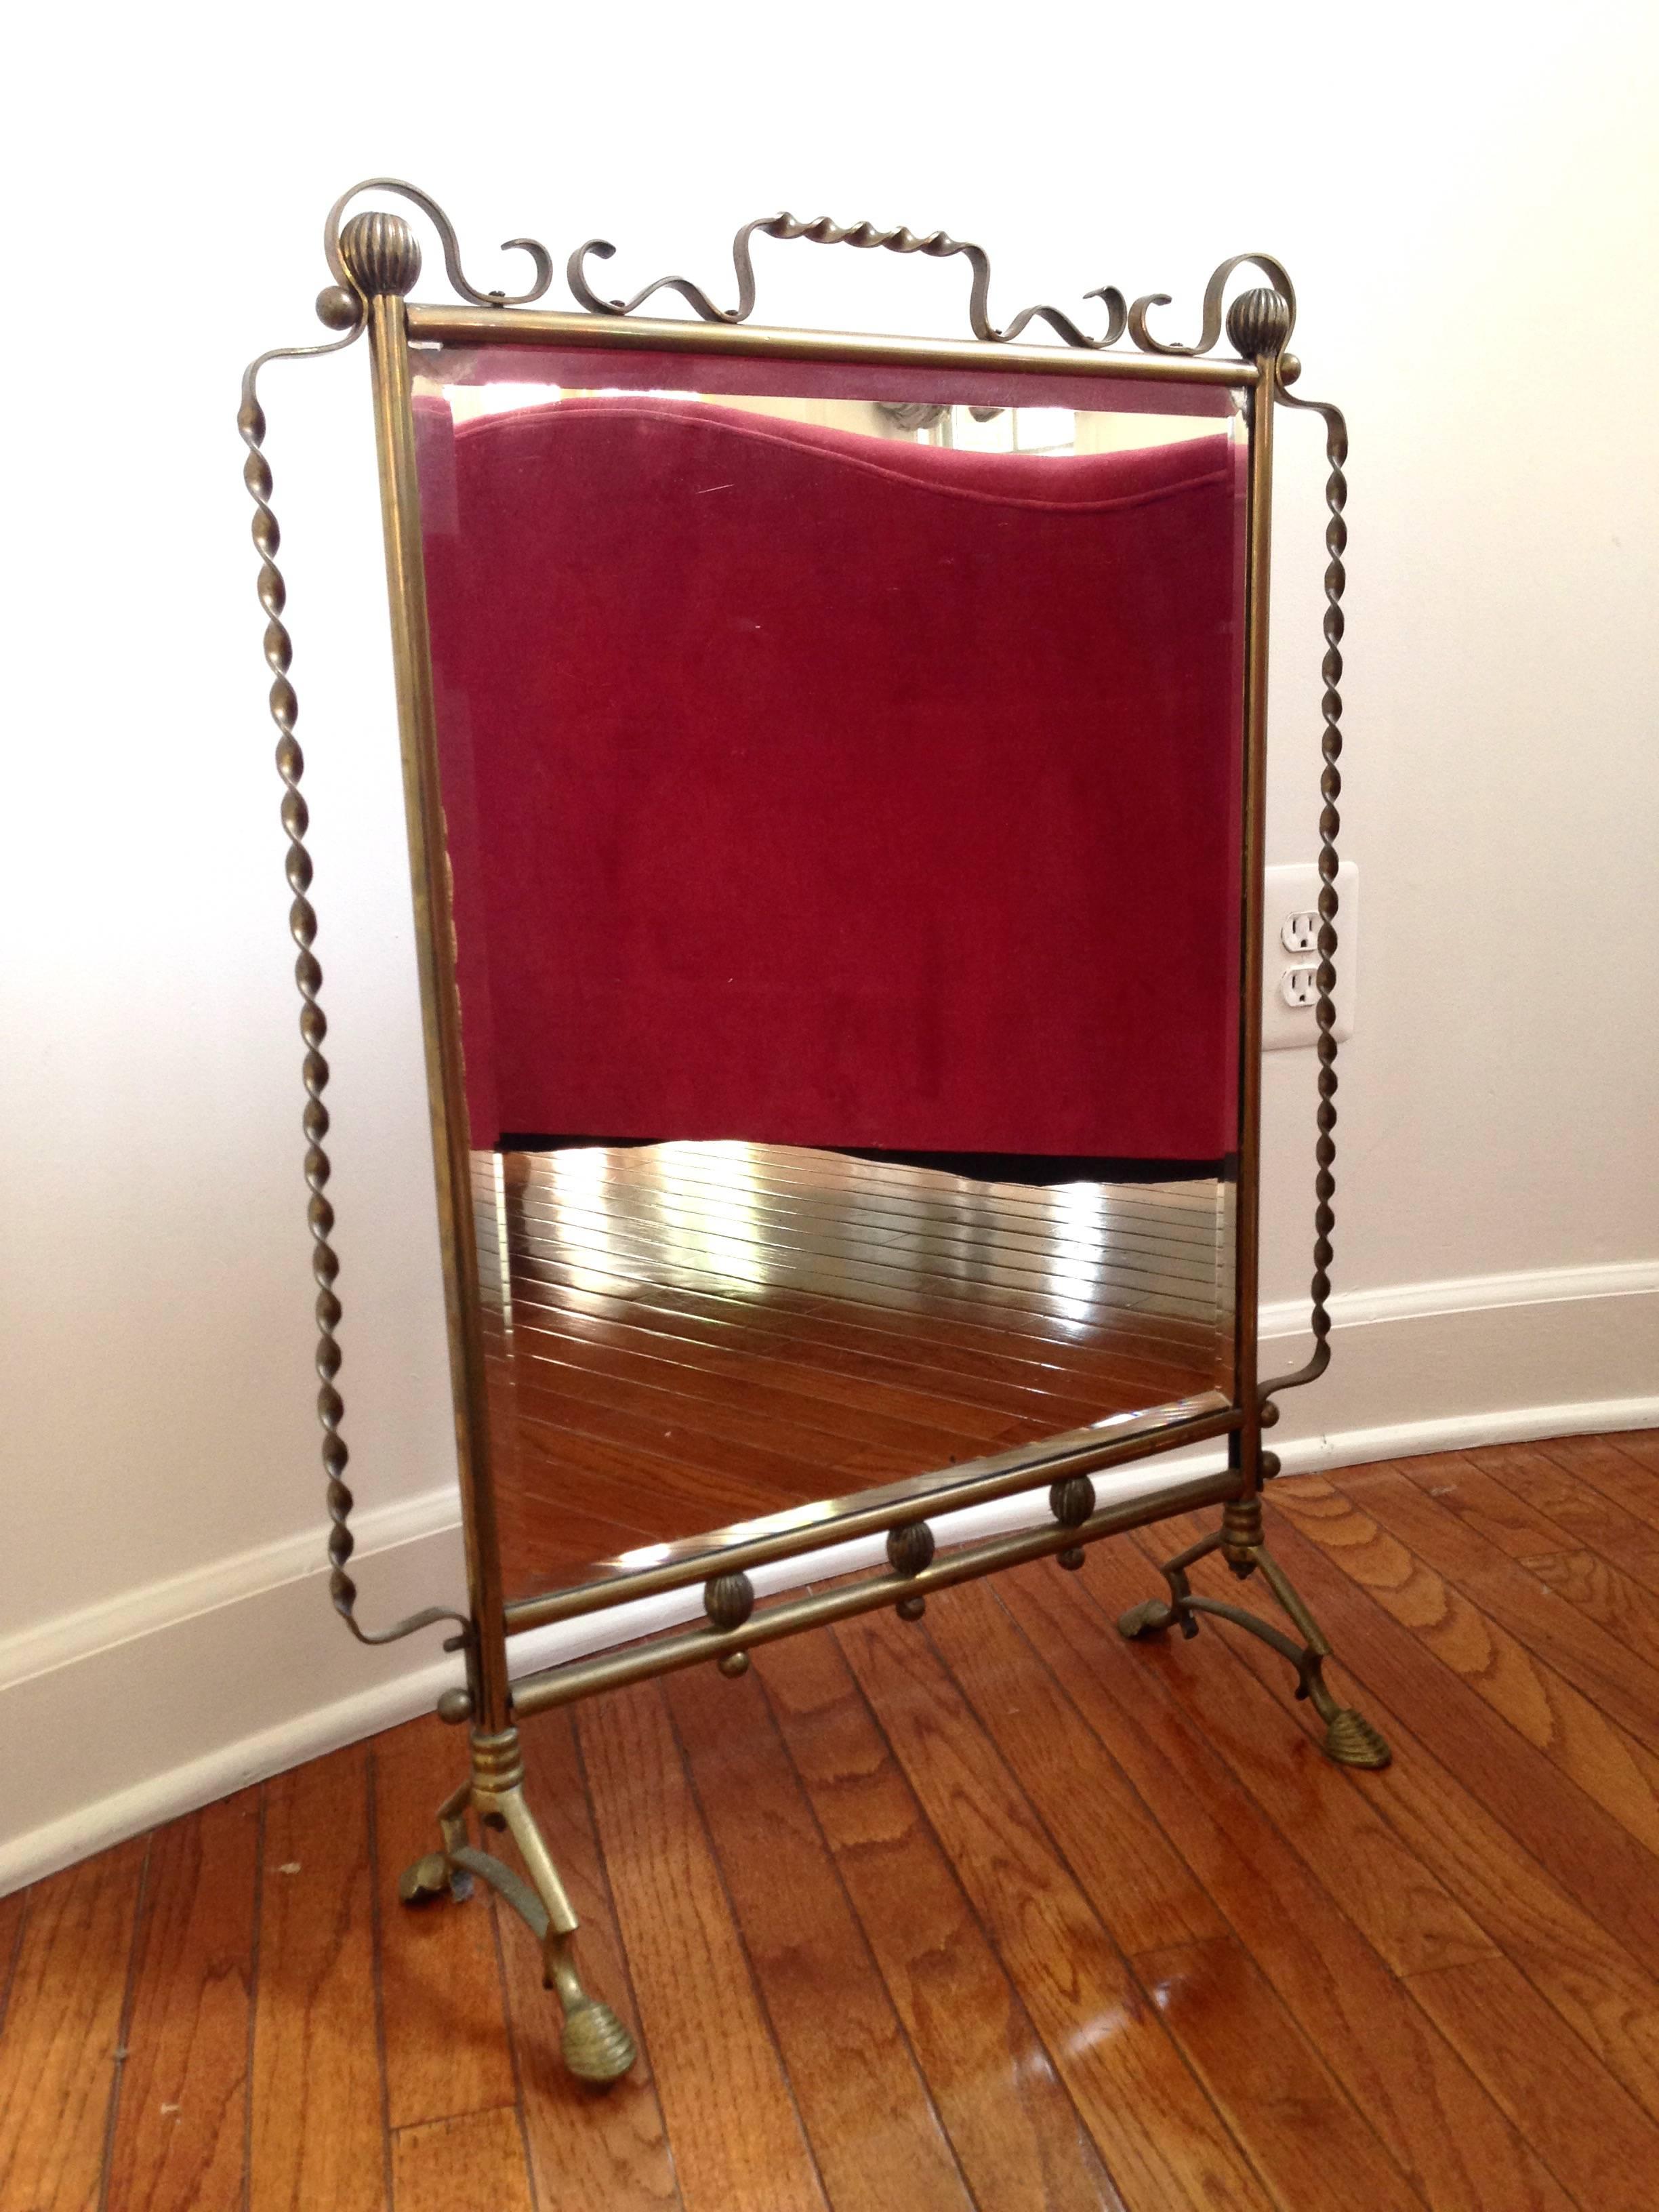 A very rare and stylish French fire screen very much in the style of Raymond Subes or Gilbert Poillerat. The mirrored front has beveled edges and the brass details including the legs are incredible.